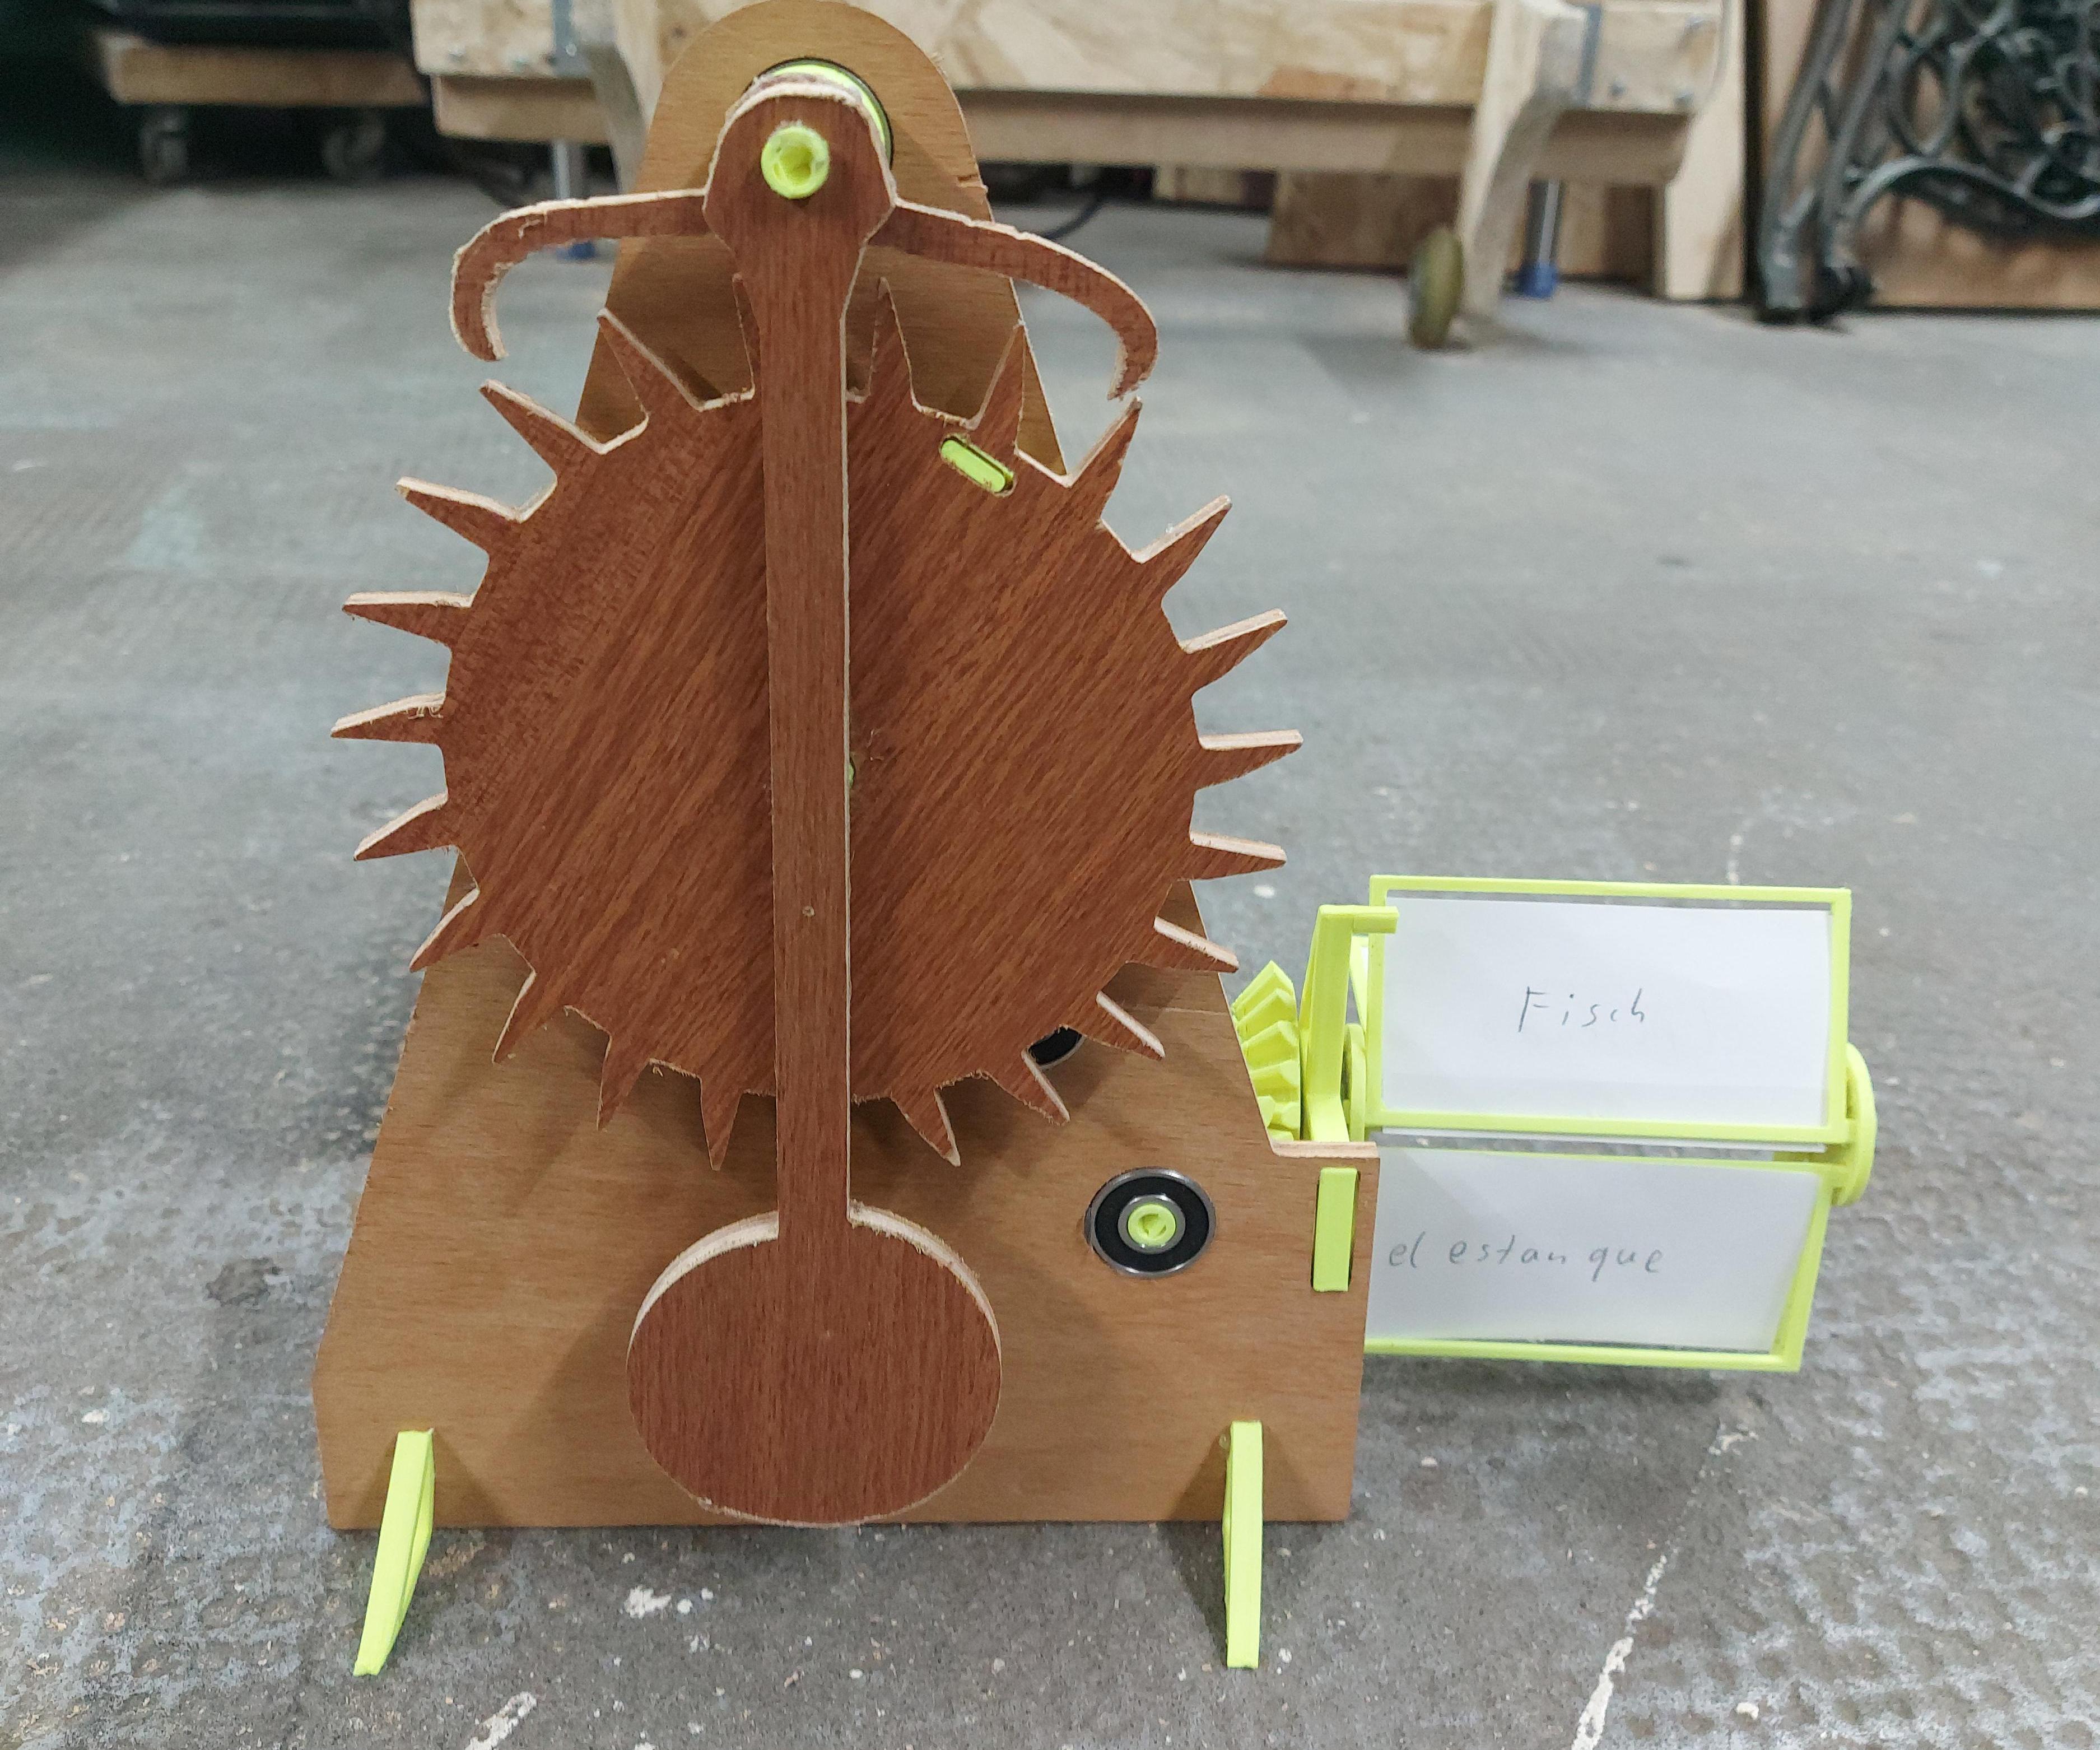 Vocabulary Learning Pendulum Mechanism Made From Cnc Cut Wood and 3d Printed Parts